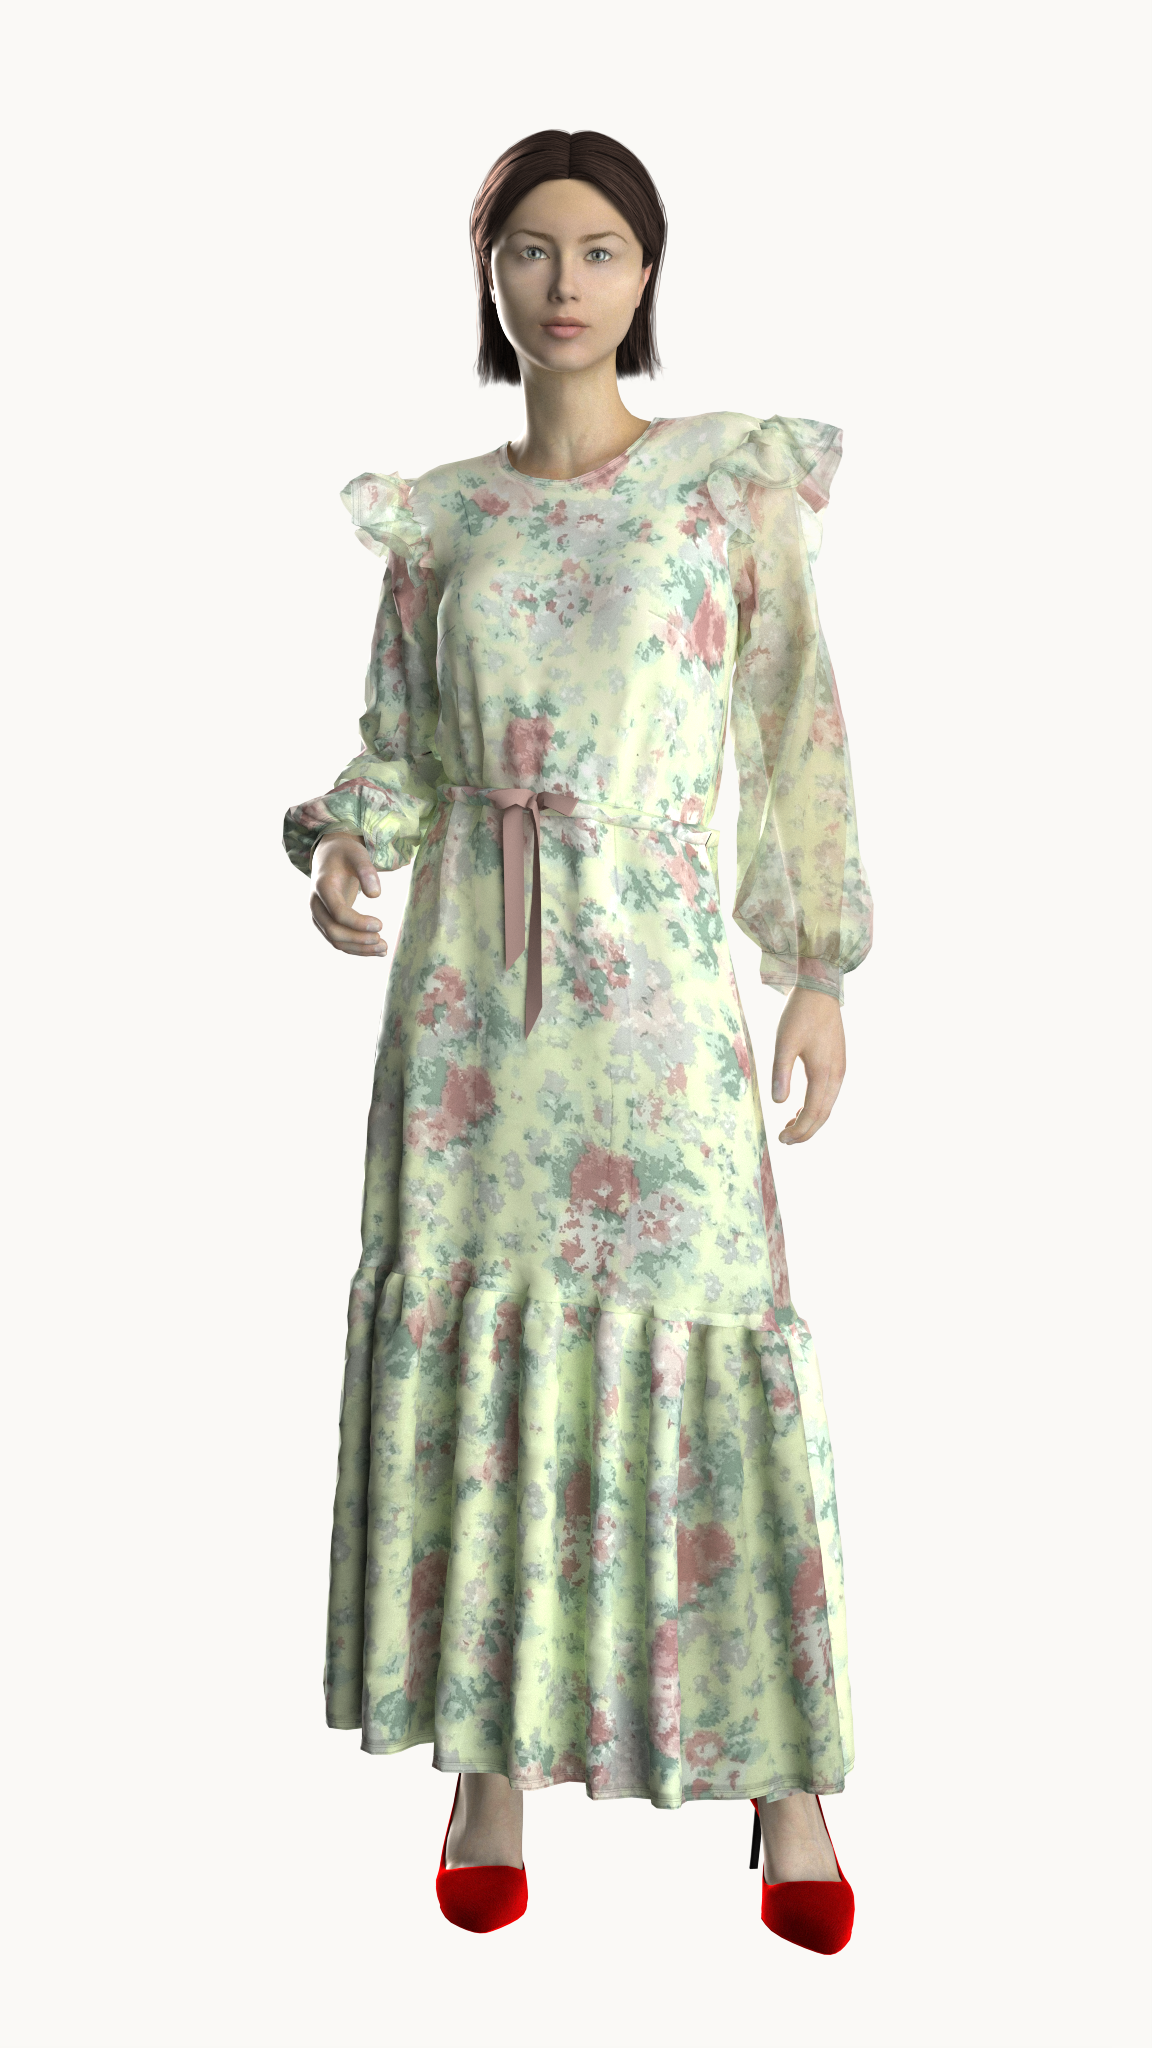 Printed to perfection, this so gorgeous maxi dress is featured in a femme, floral design with ruffle detailing, exaggerated sleeves with belted waist band.